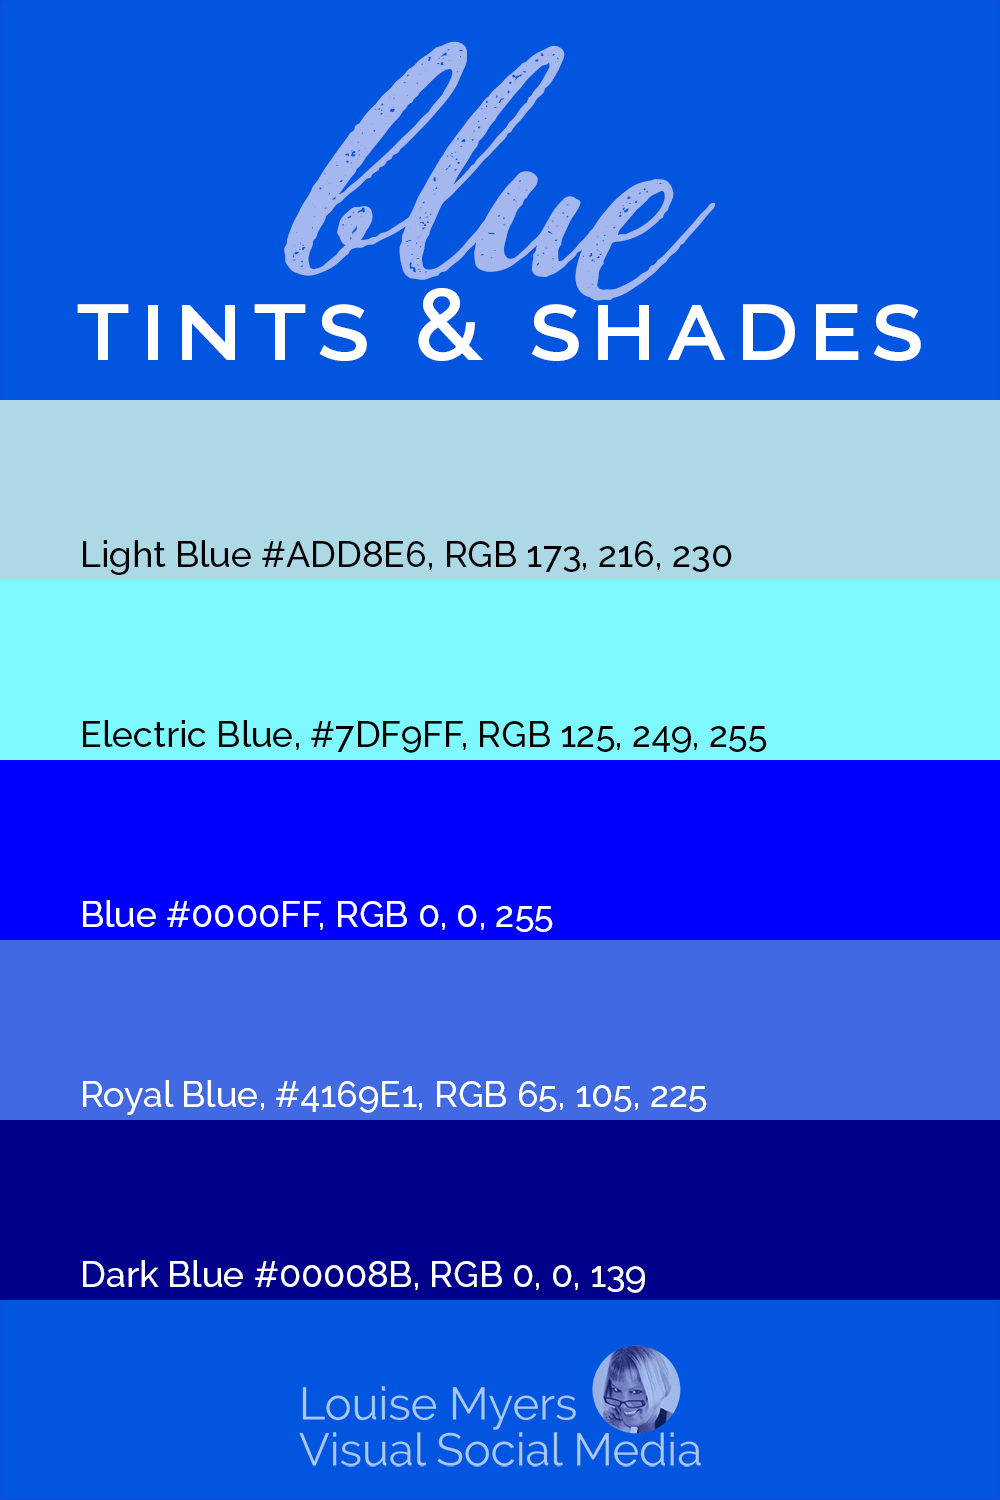 bands of different blue tints and shades with hex codes and RGB values.